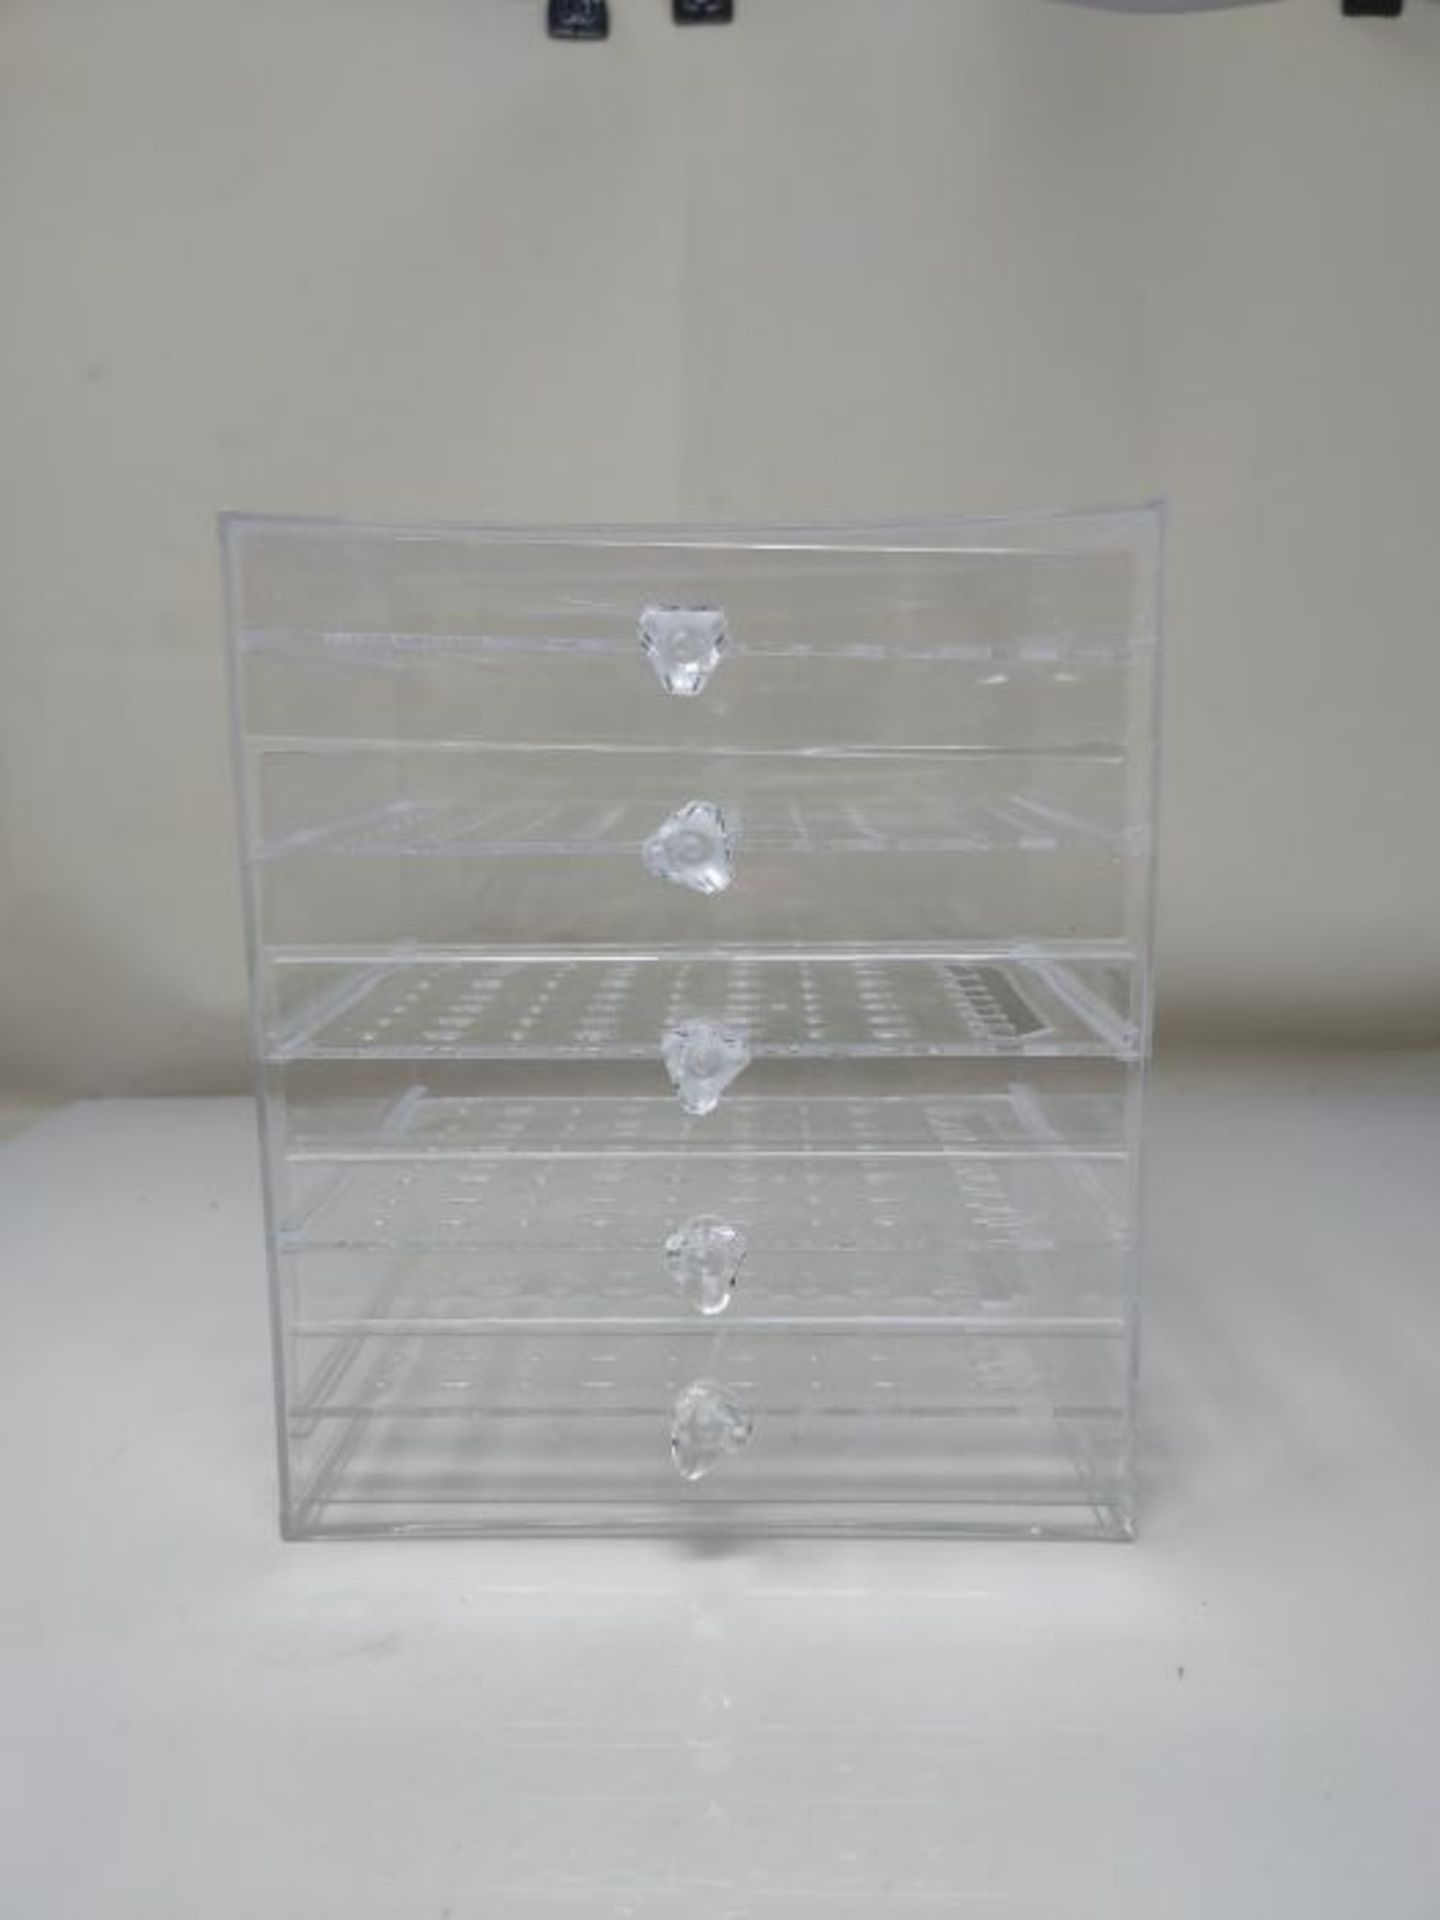 Tomaibaby Clear Plastic Jewellery Storage Box Anti-Dust Necklace Organiser Holder Earr - Image 2 of 2